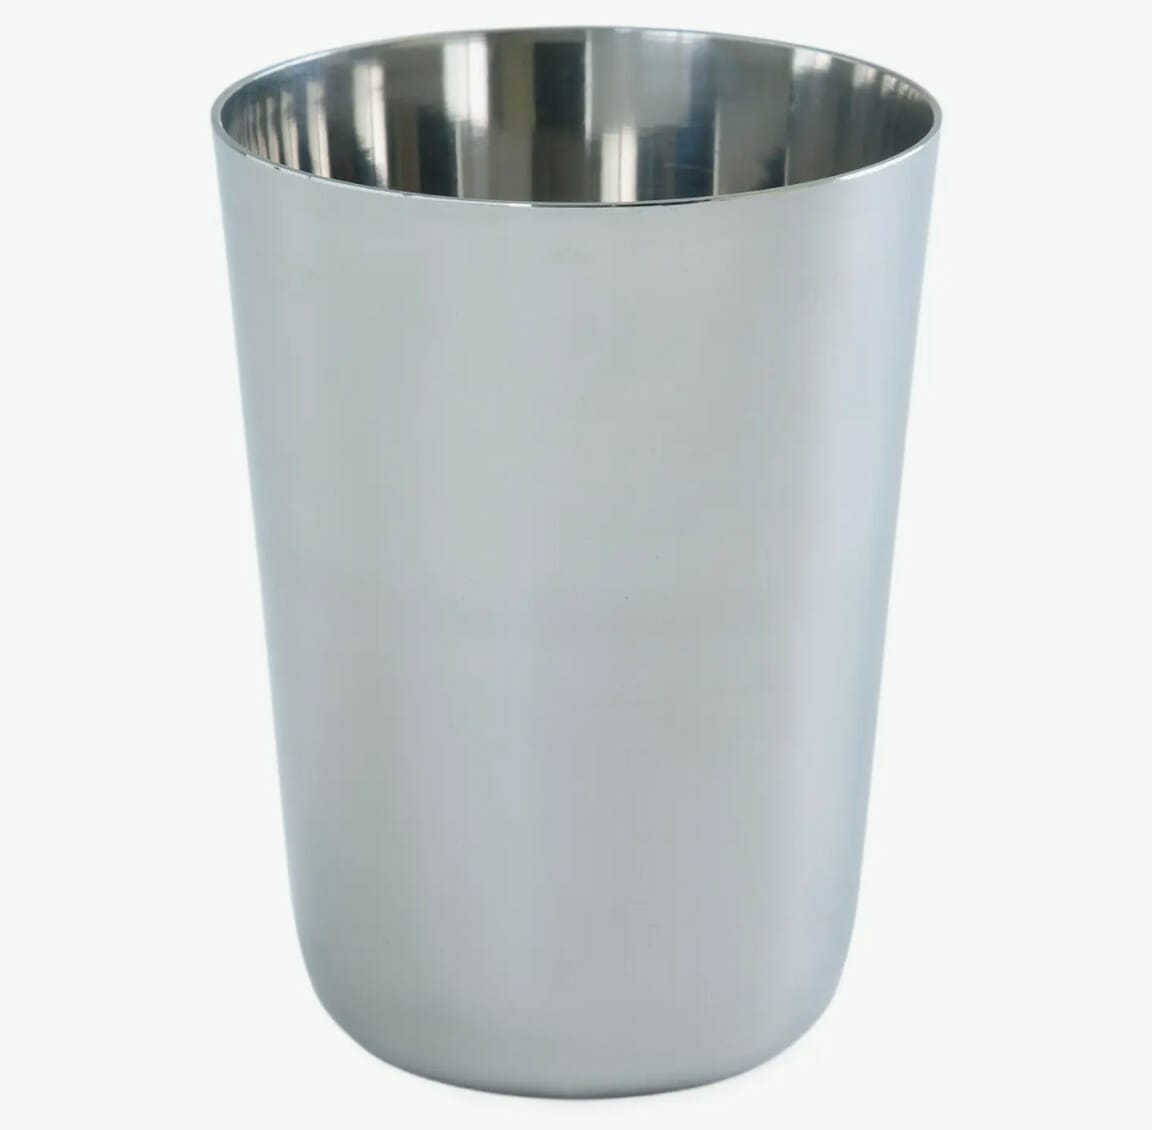 https://ex9gmccx2pn.exactdn.com/wp-content/uploads/2023/01/clean-planetware-stainless-steel-cups-set-of-4.jpg?strip=all&lossy=1&ssl=1